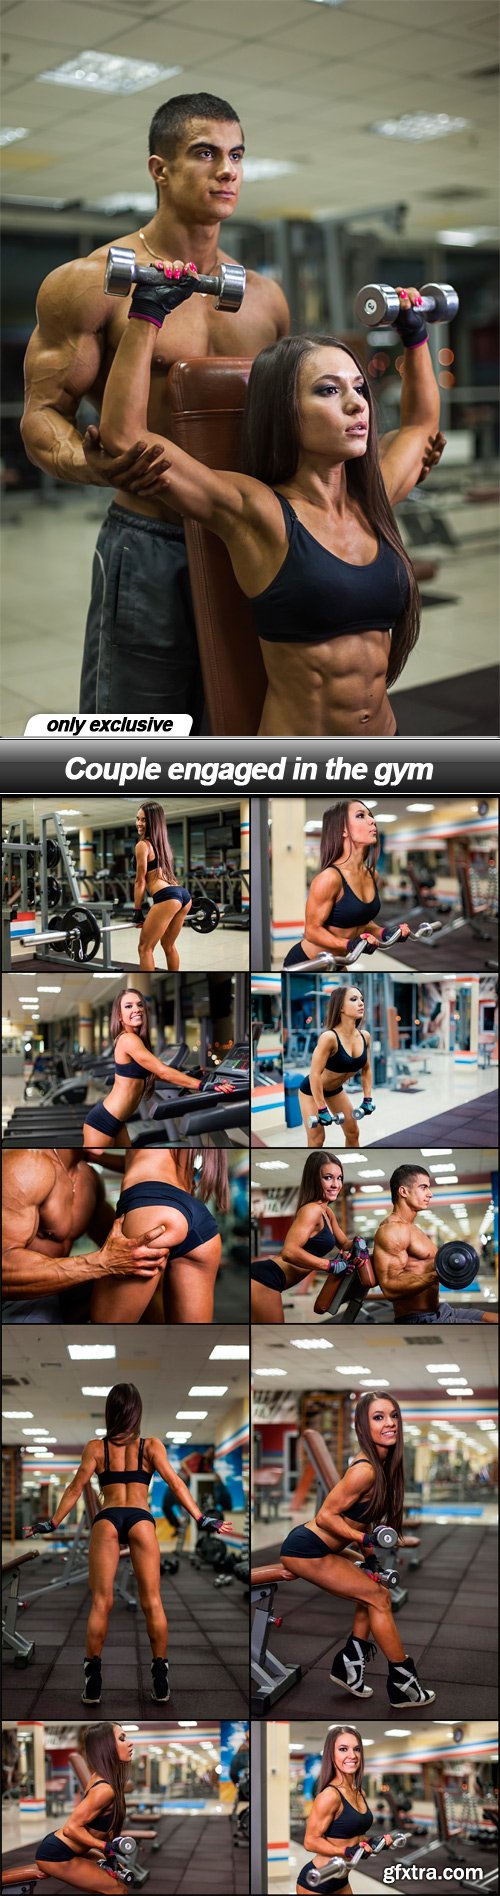 Couple engaged in the gym - 11 UHQ JPEG